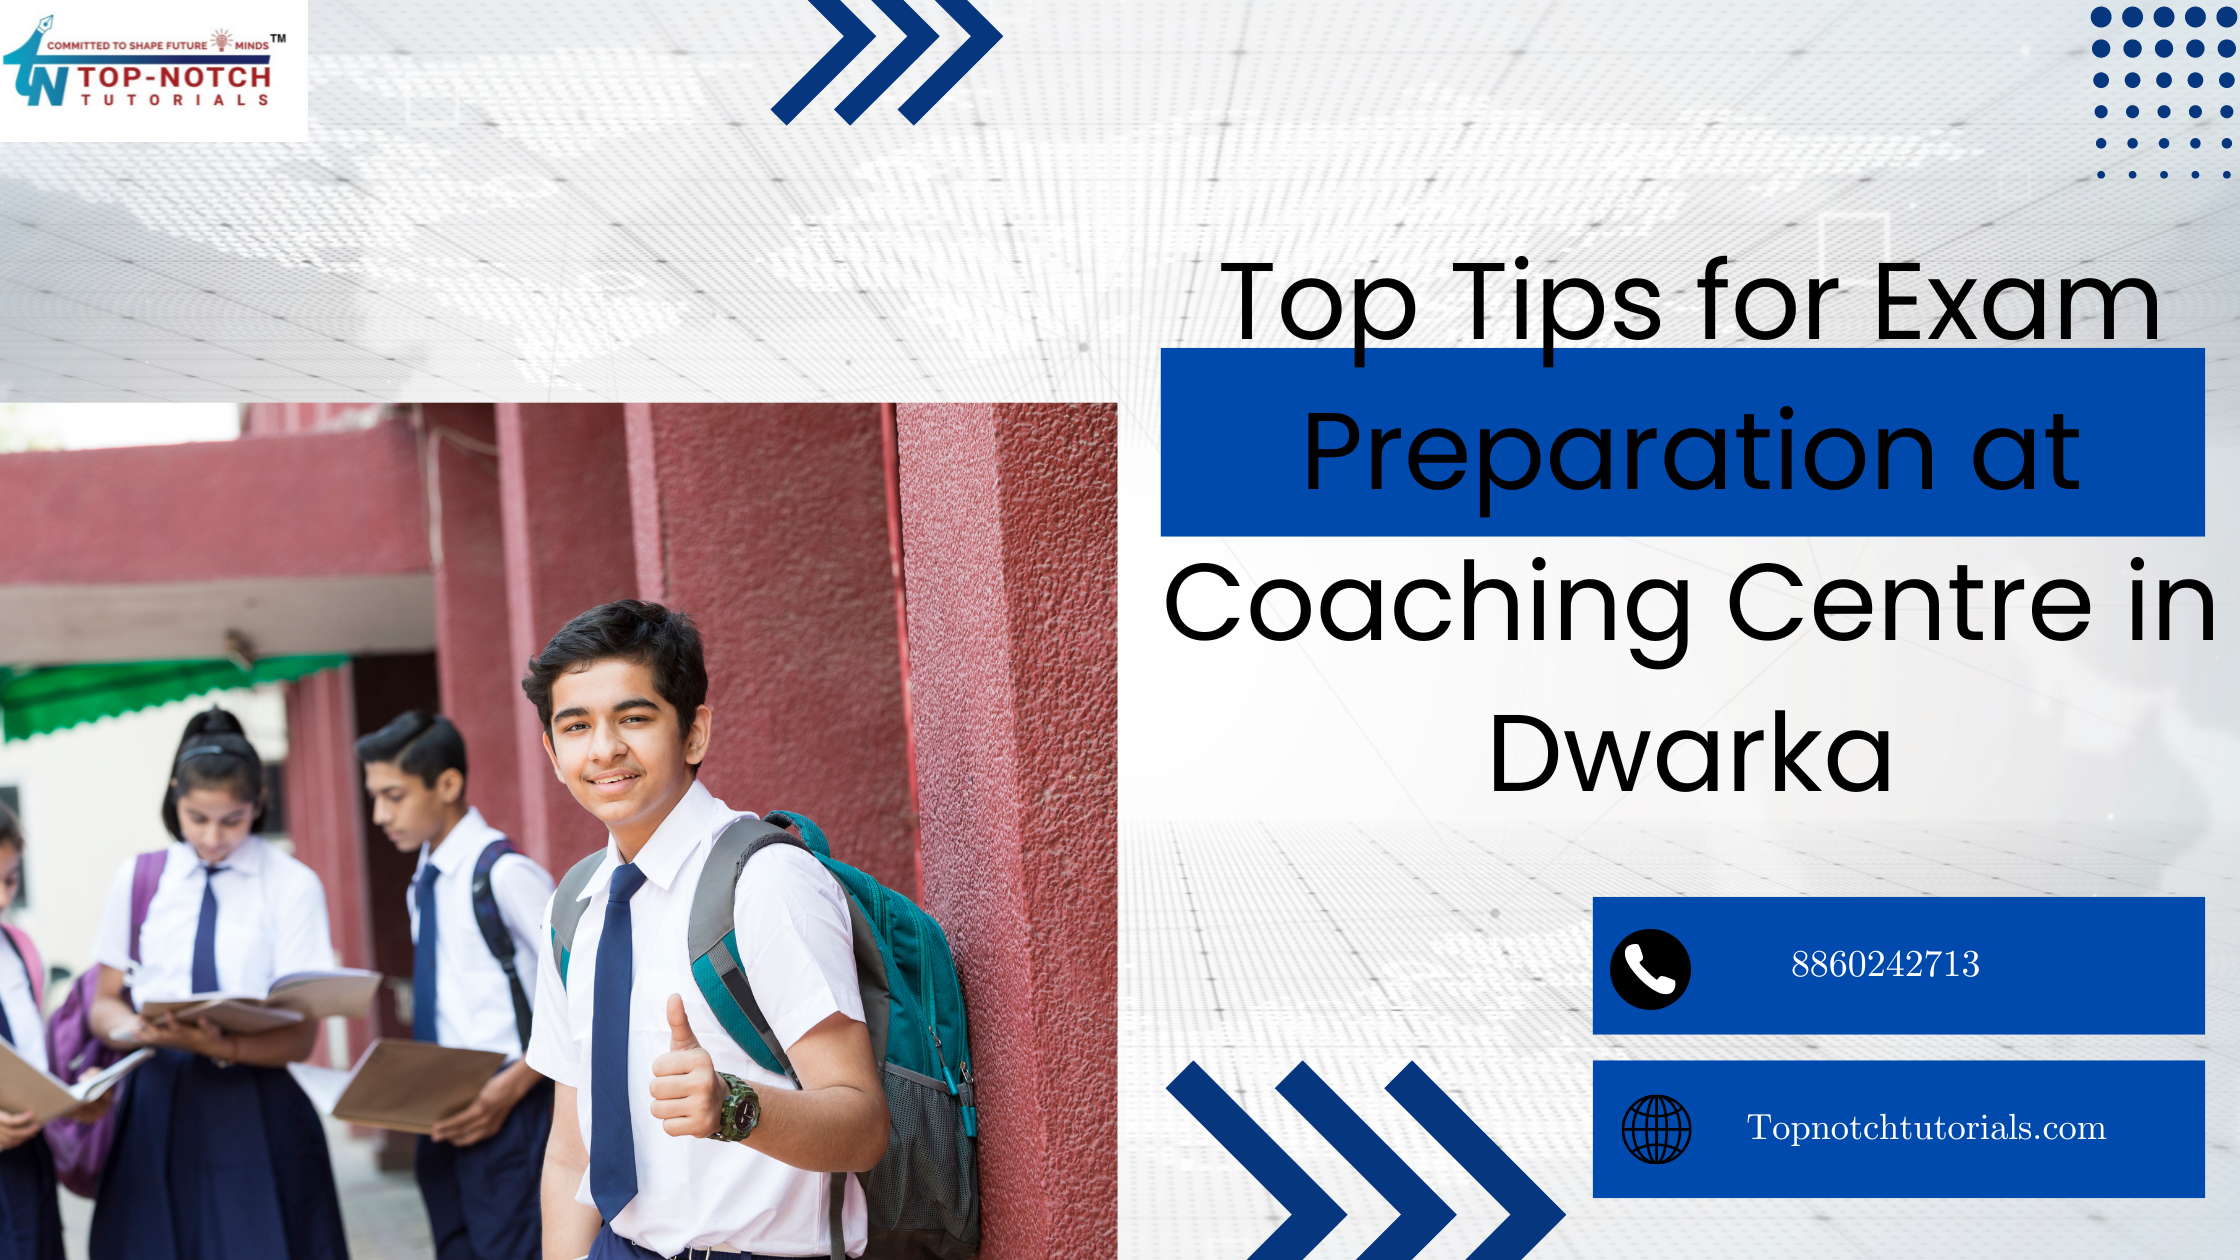 Top Tips for Exam Preparation at Coaching Centre in Dwarka 